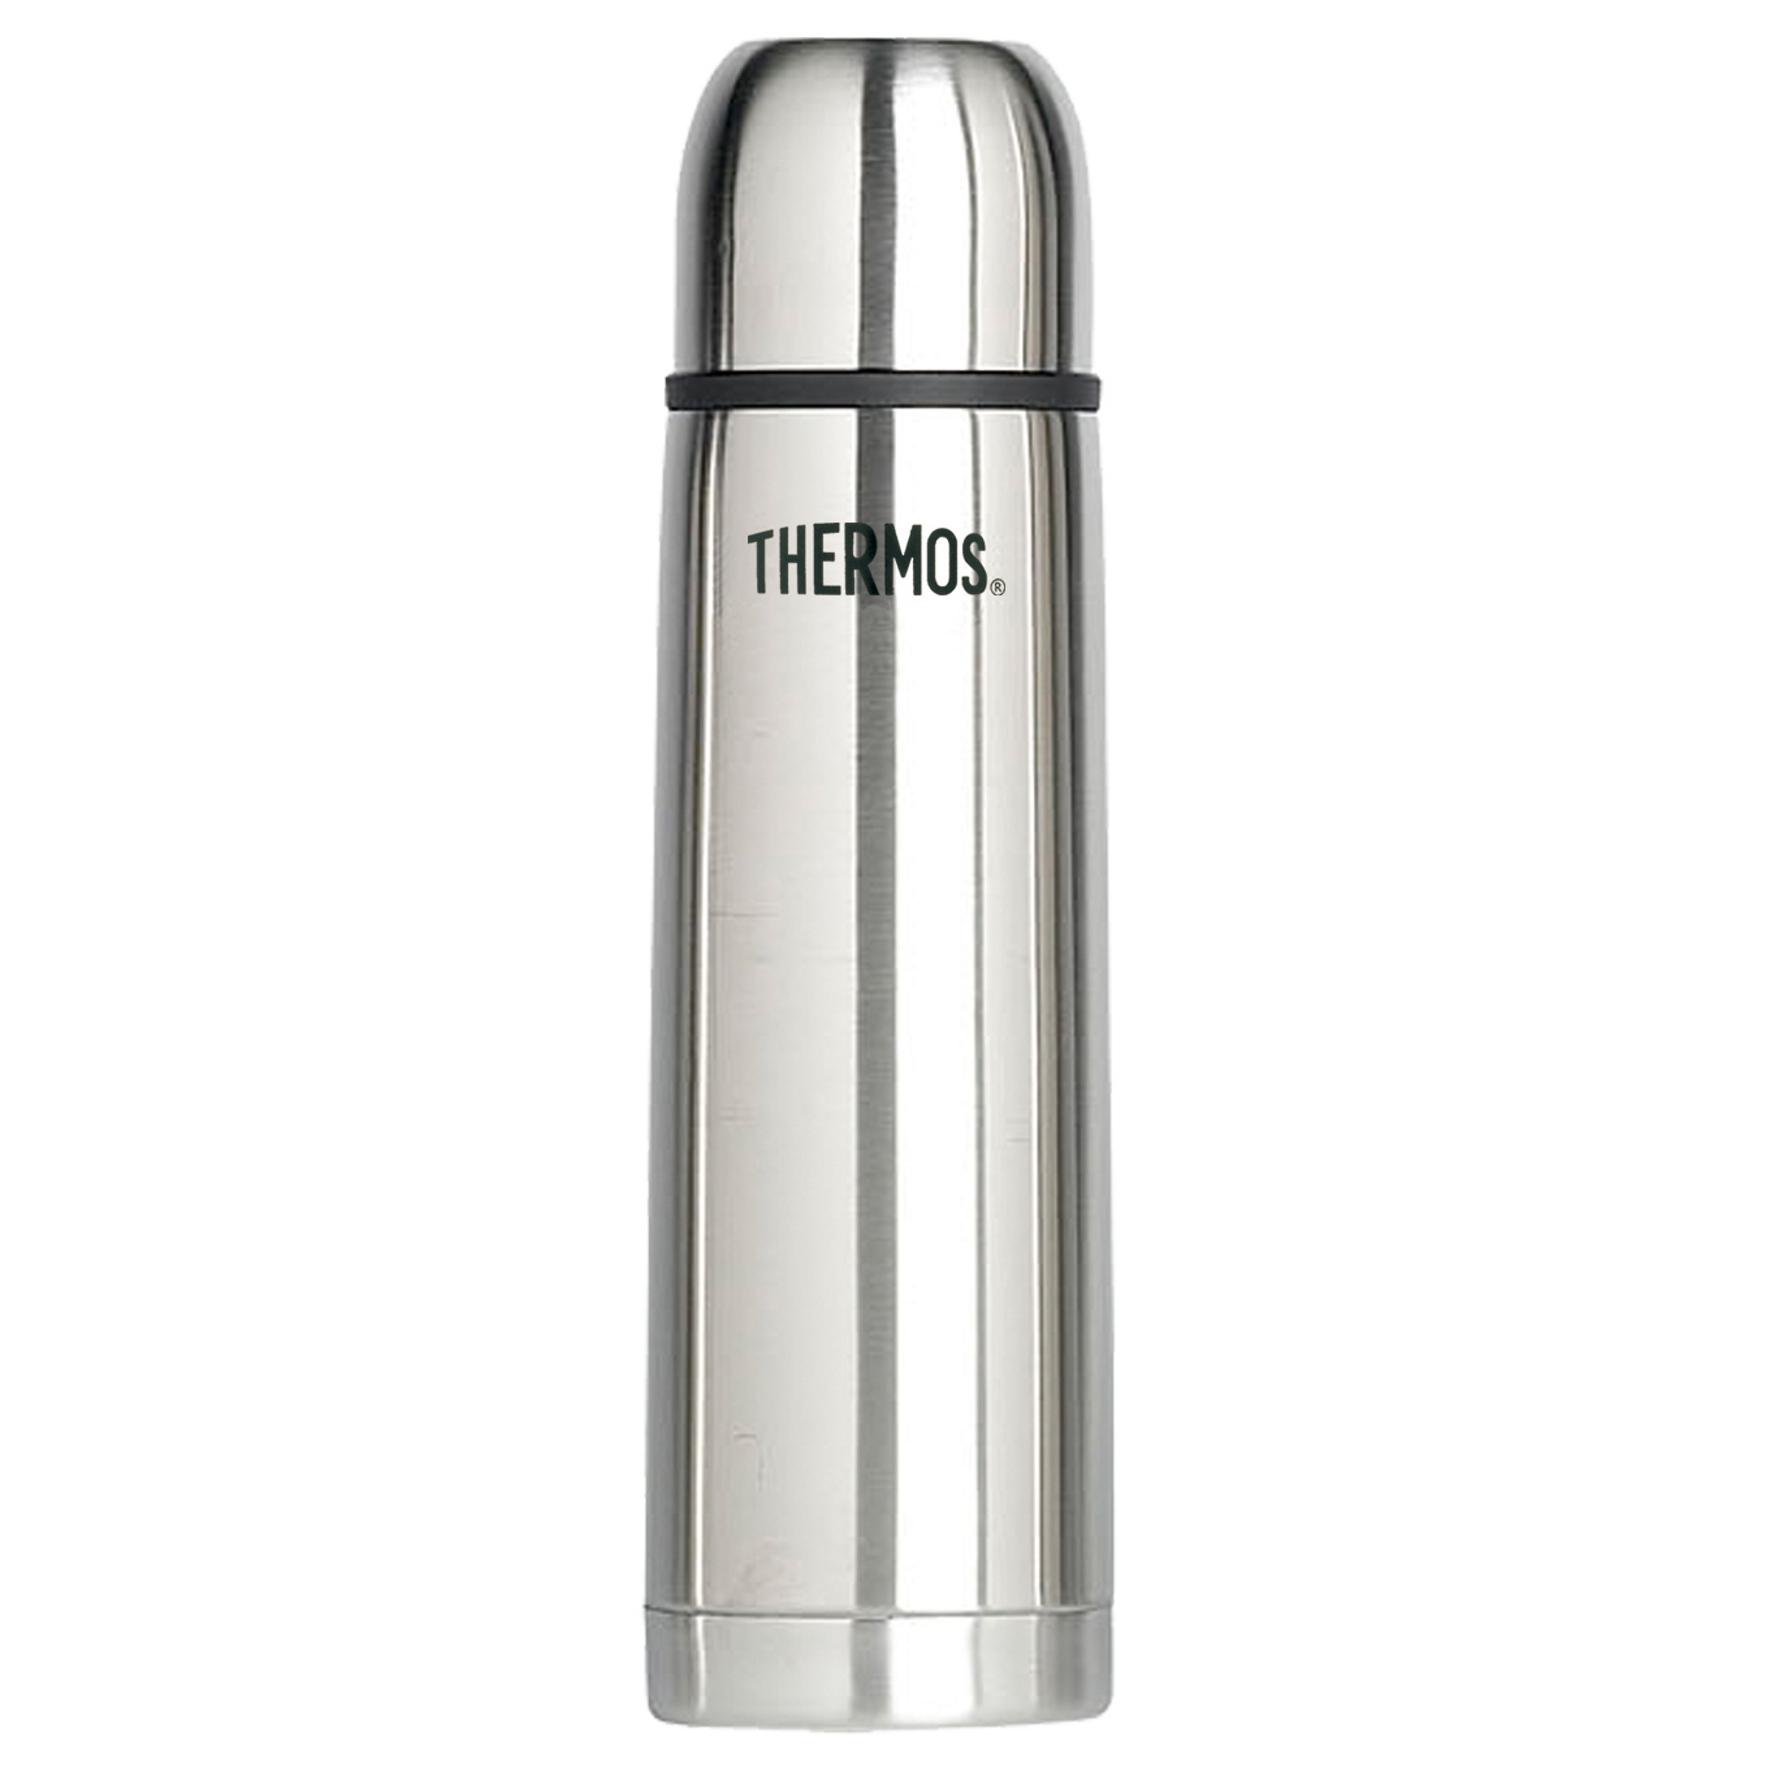 Foto Termo Thermos ThermoCafe Everyday 0,5 l gris foto 749417